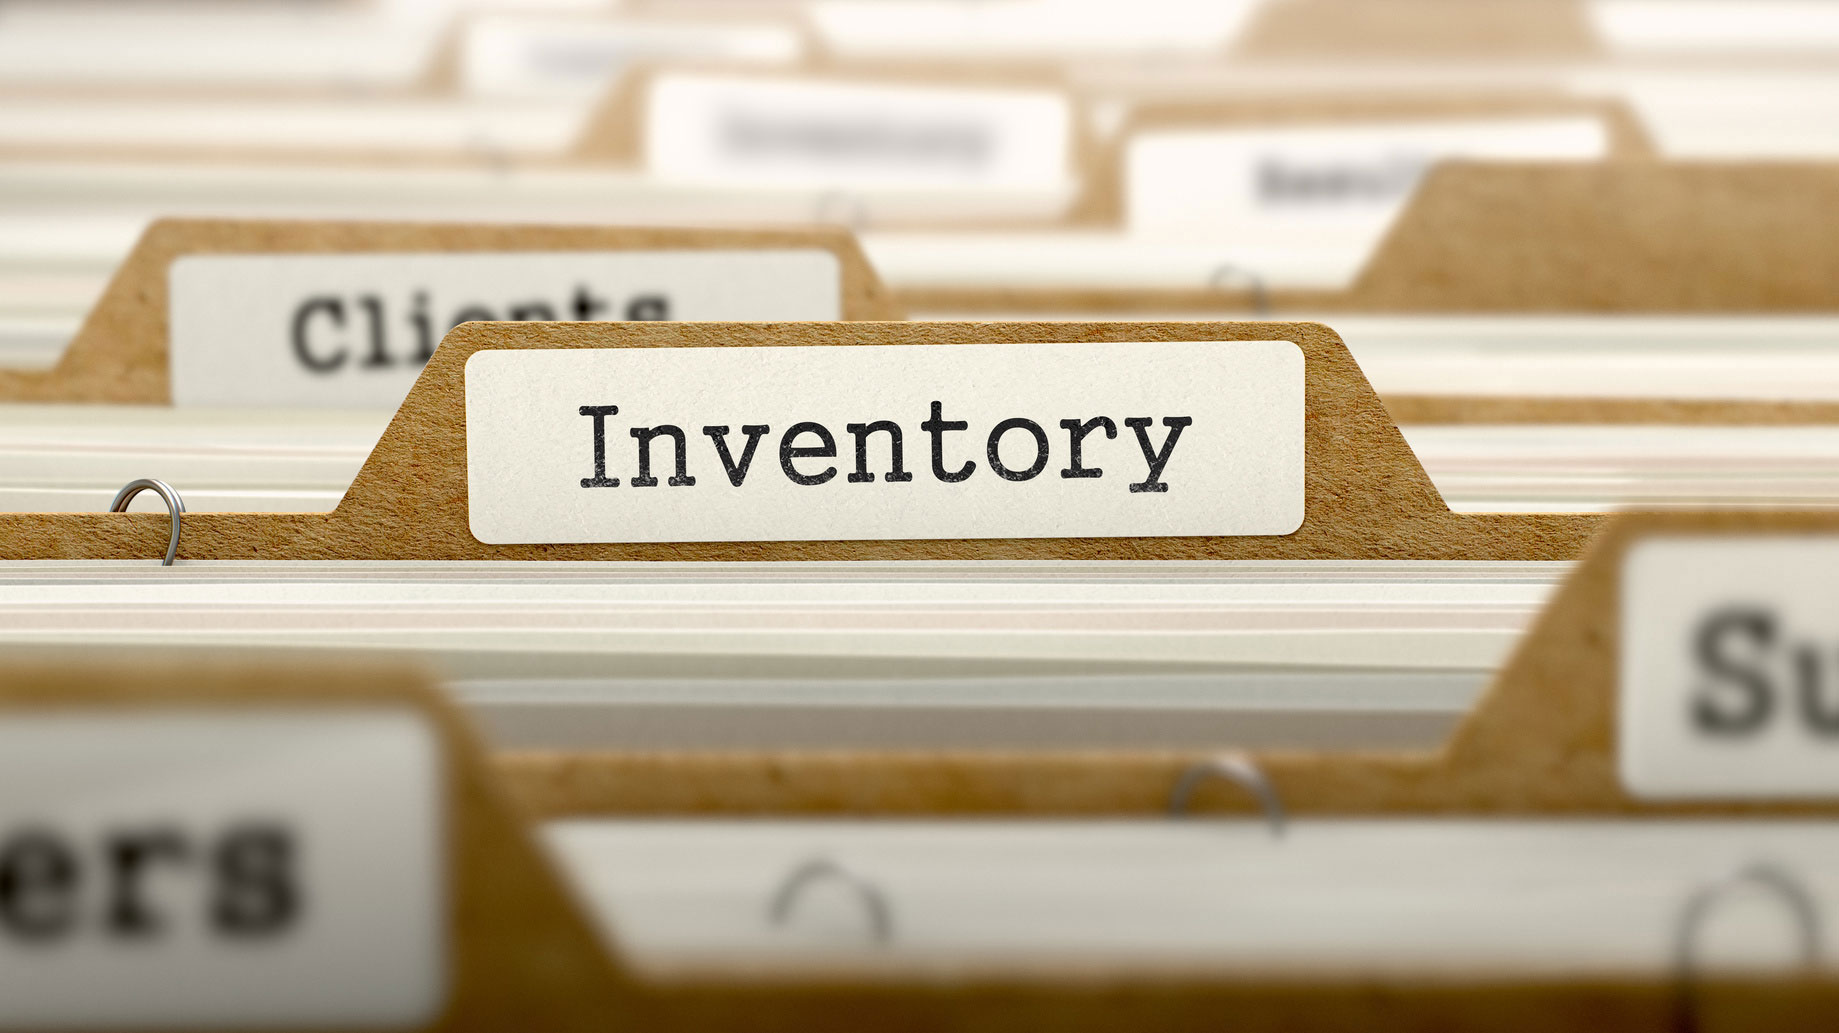 Conduct a Home Inventory